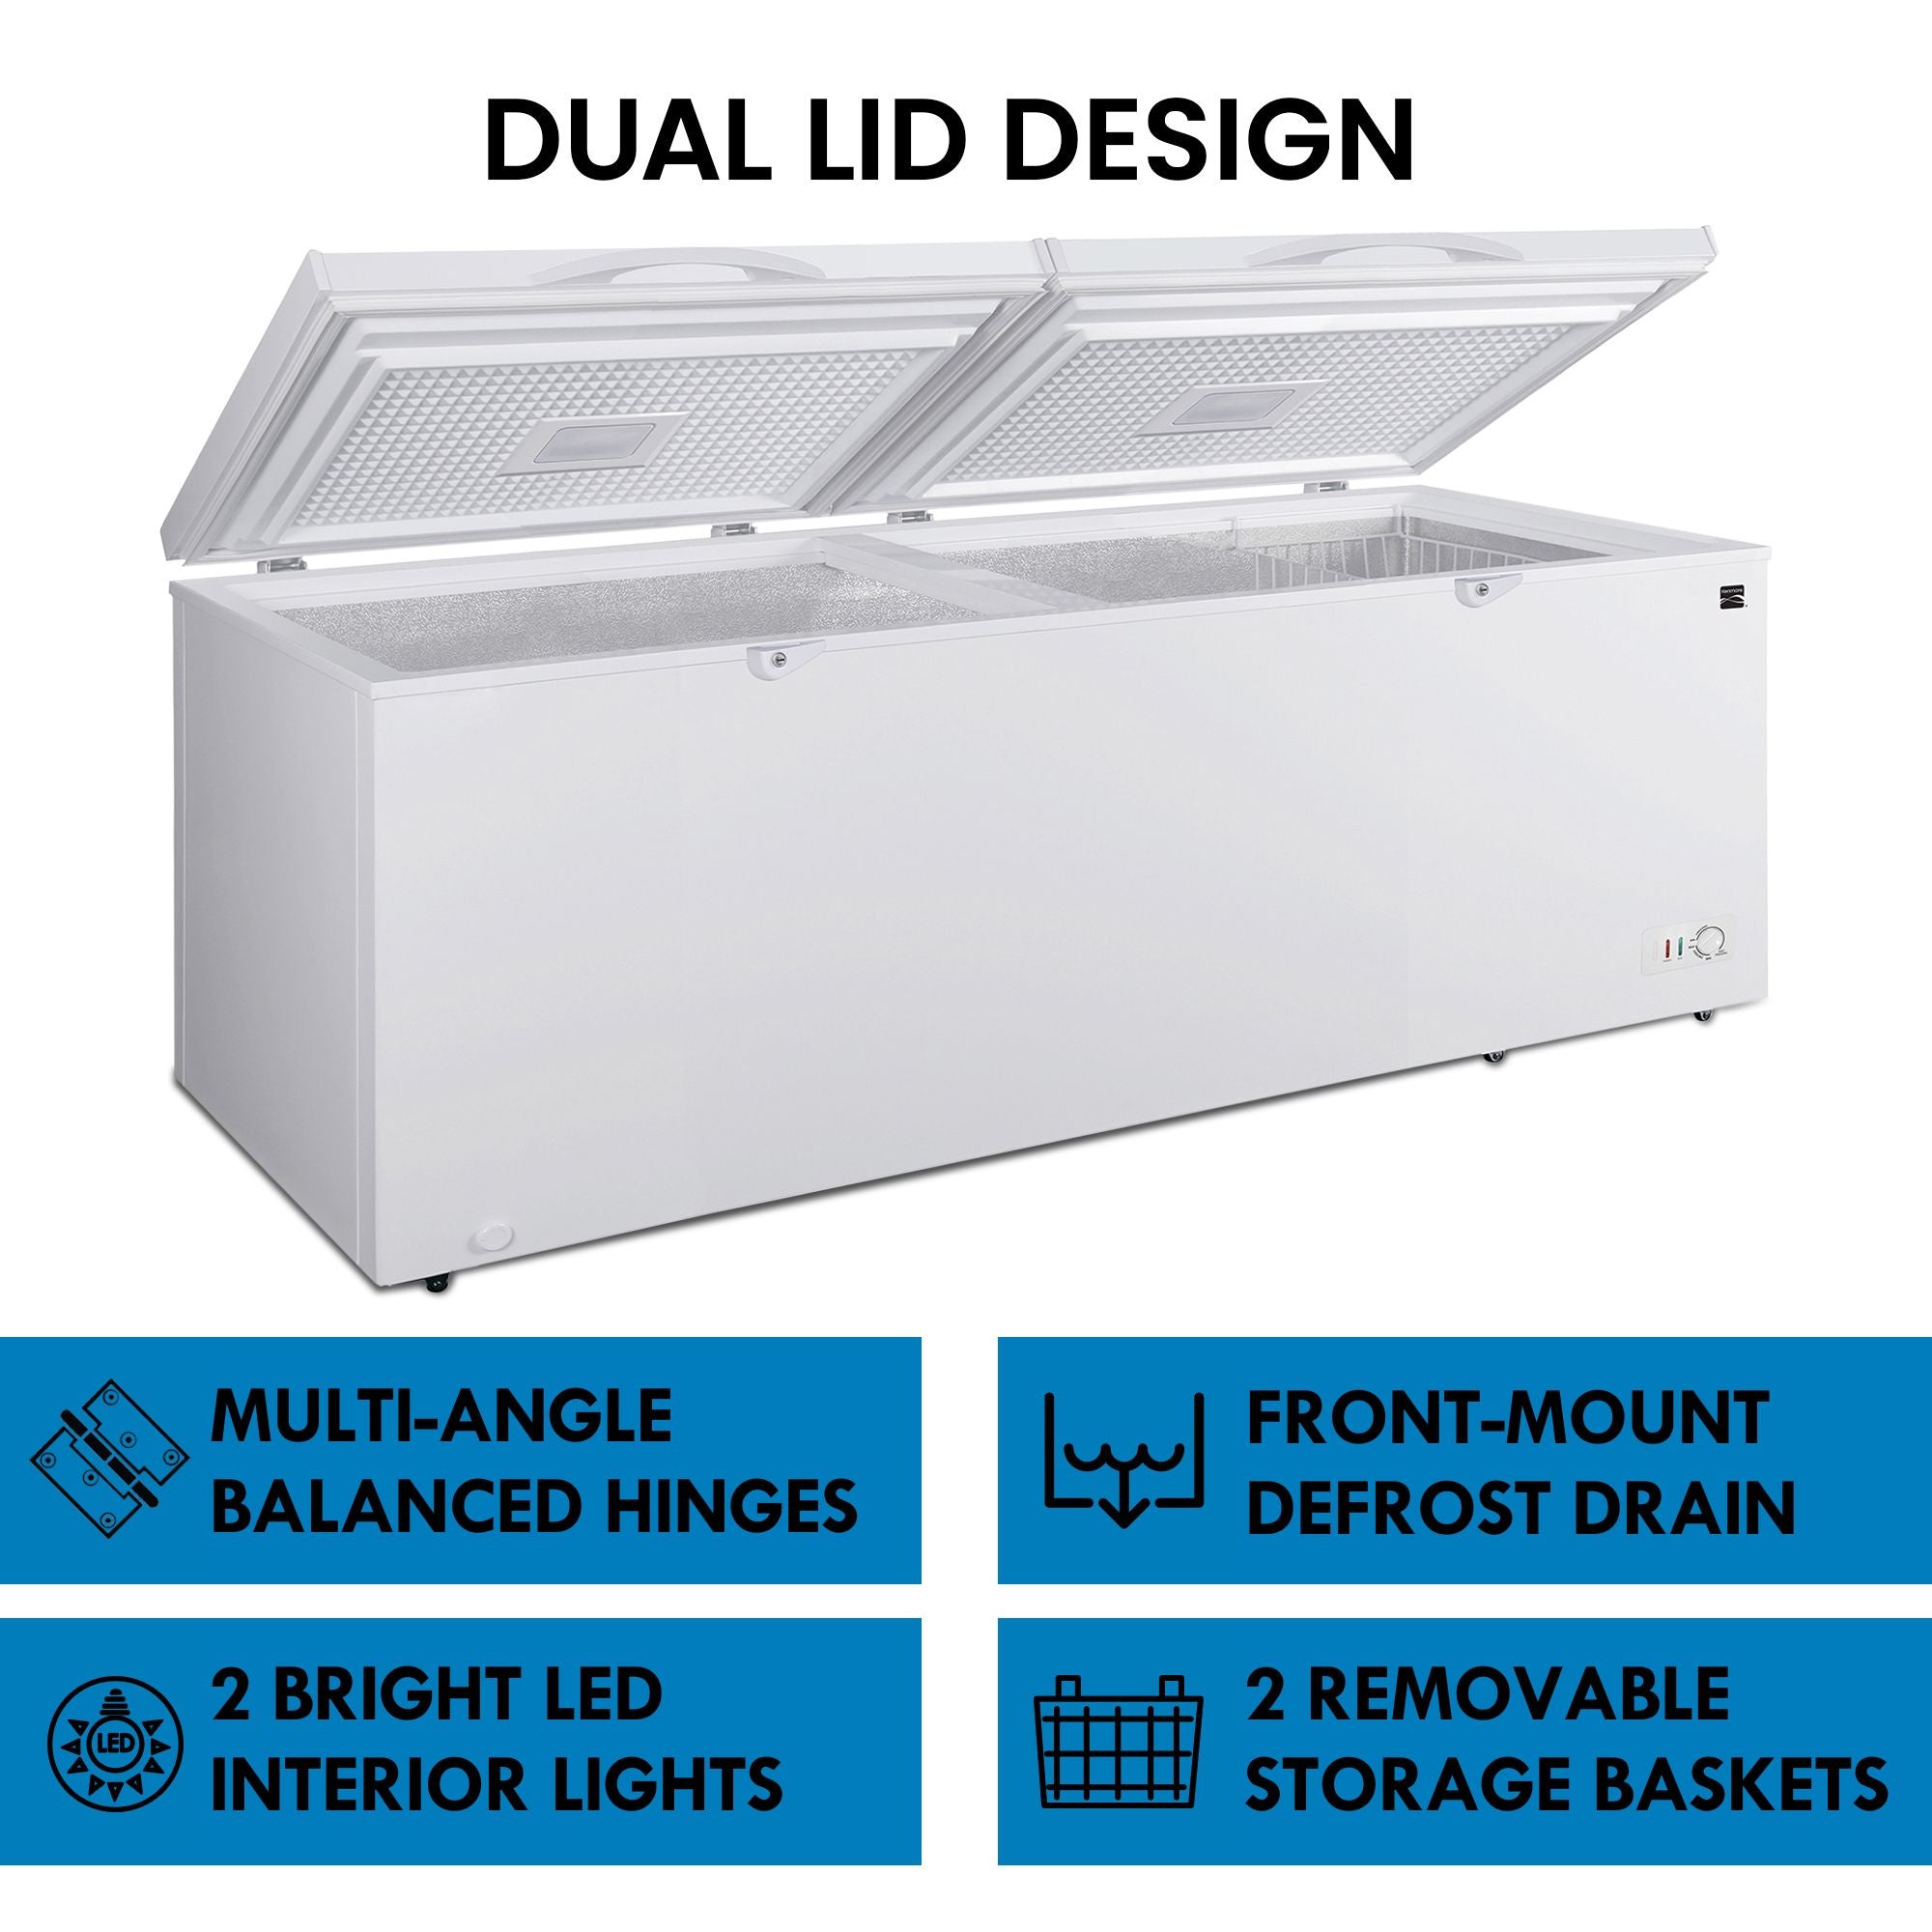 Kenmore convertible deep freeze with the left chamber lid closed and right open, on a white background with features listed below: Multi-angle balanced hinges; front-mount defrost drain; 2 LED interior lights; 2 removable storage baskets. Text above reads, "Dual lid design"